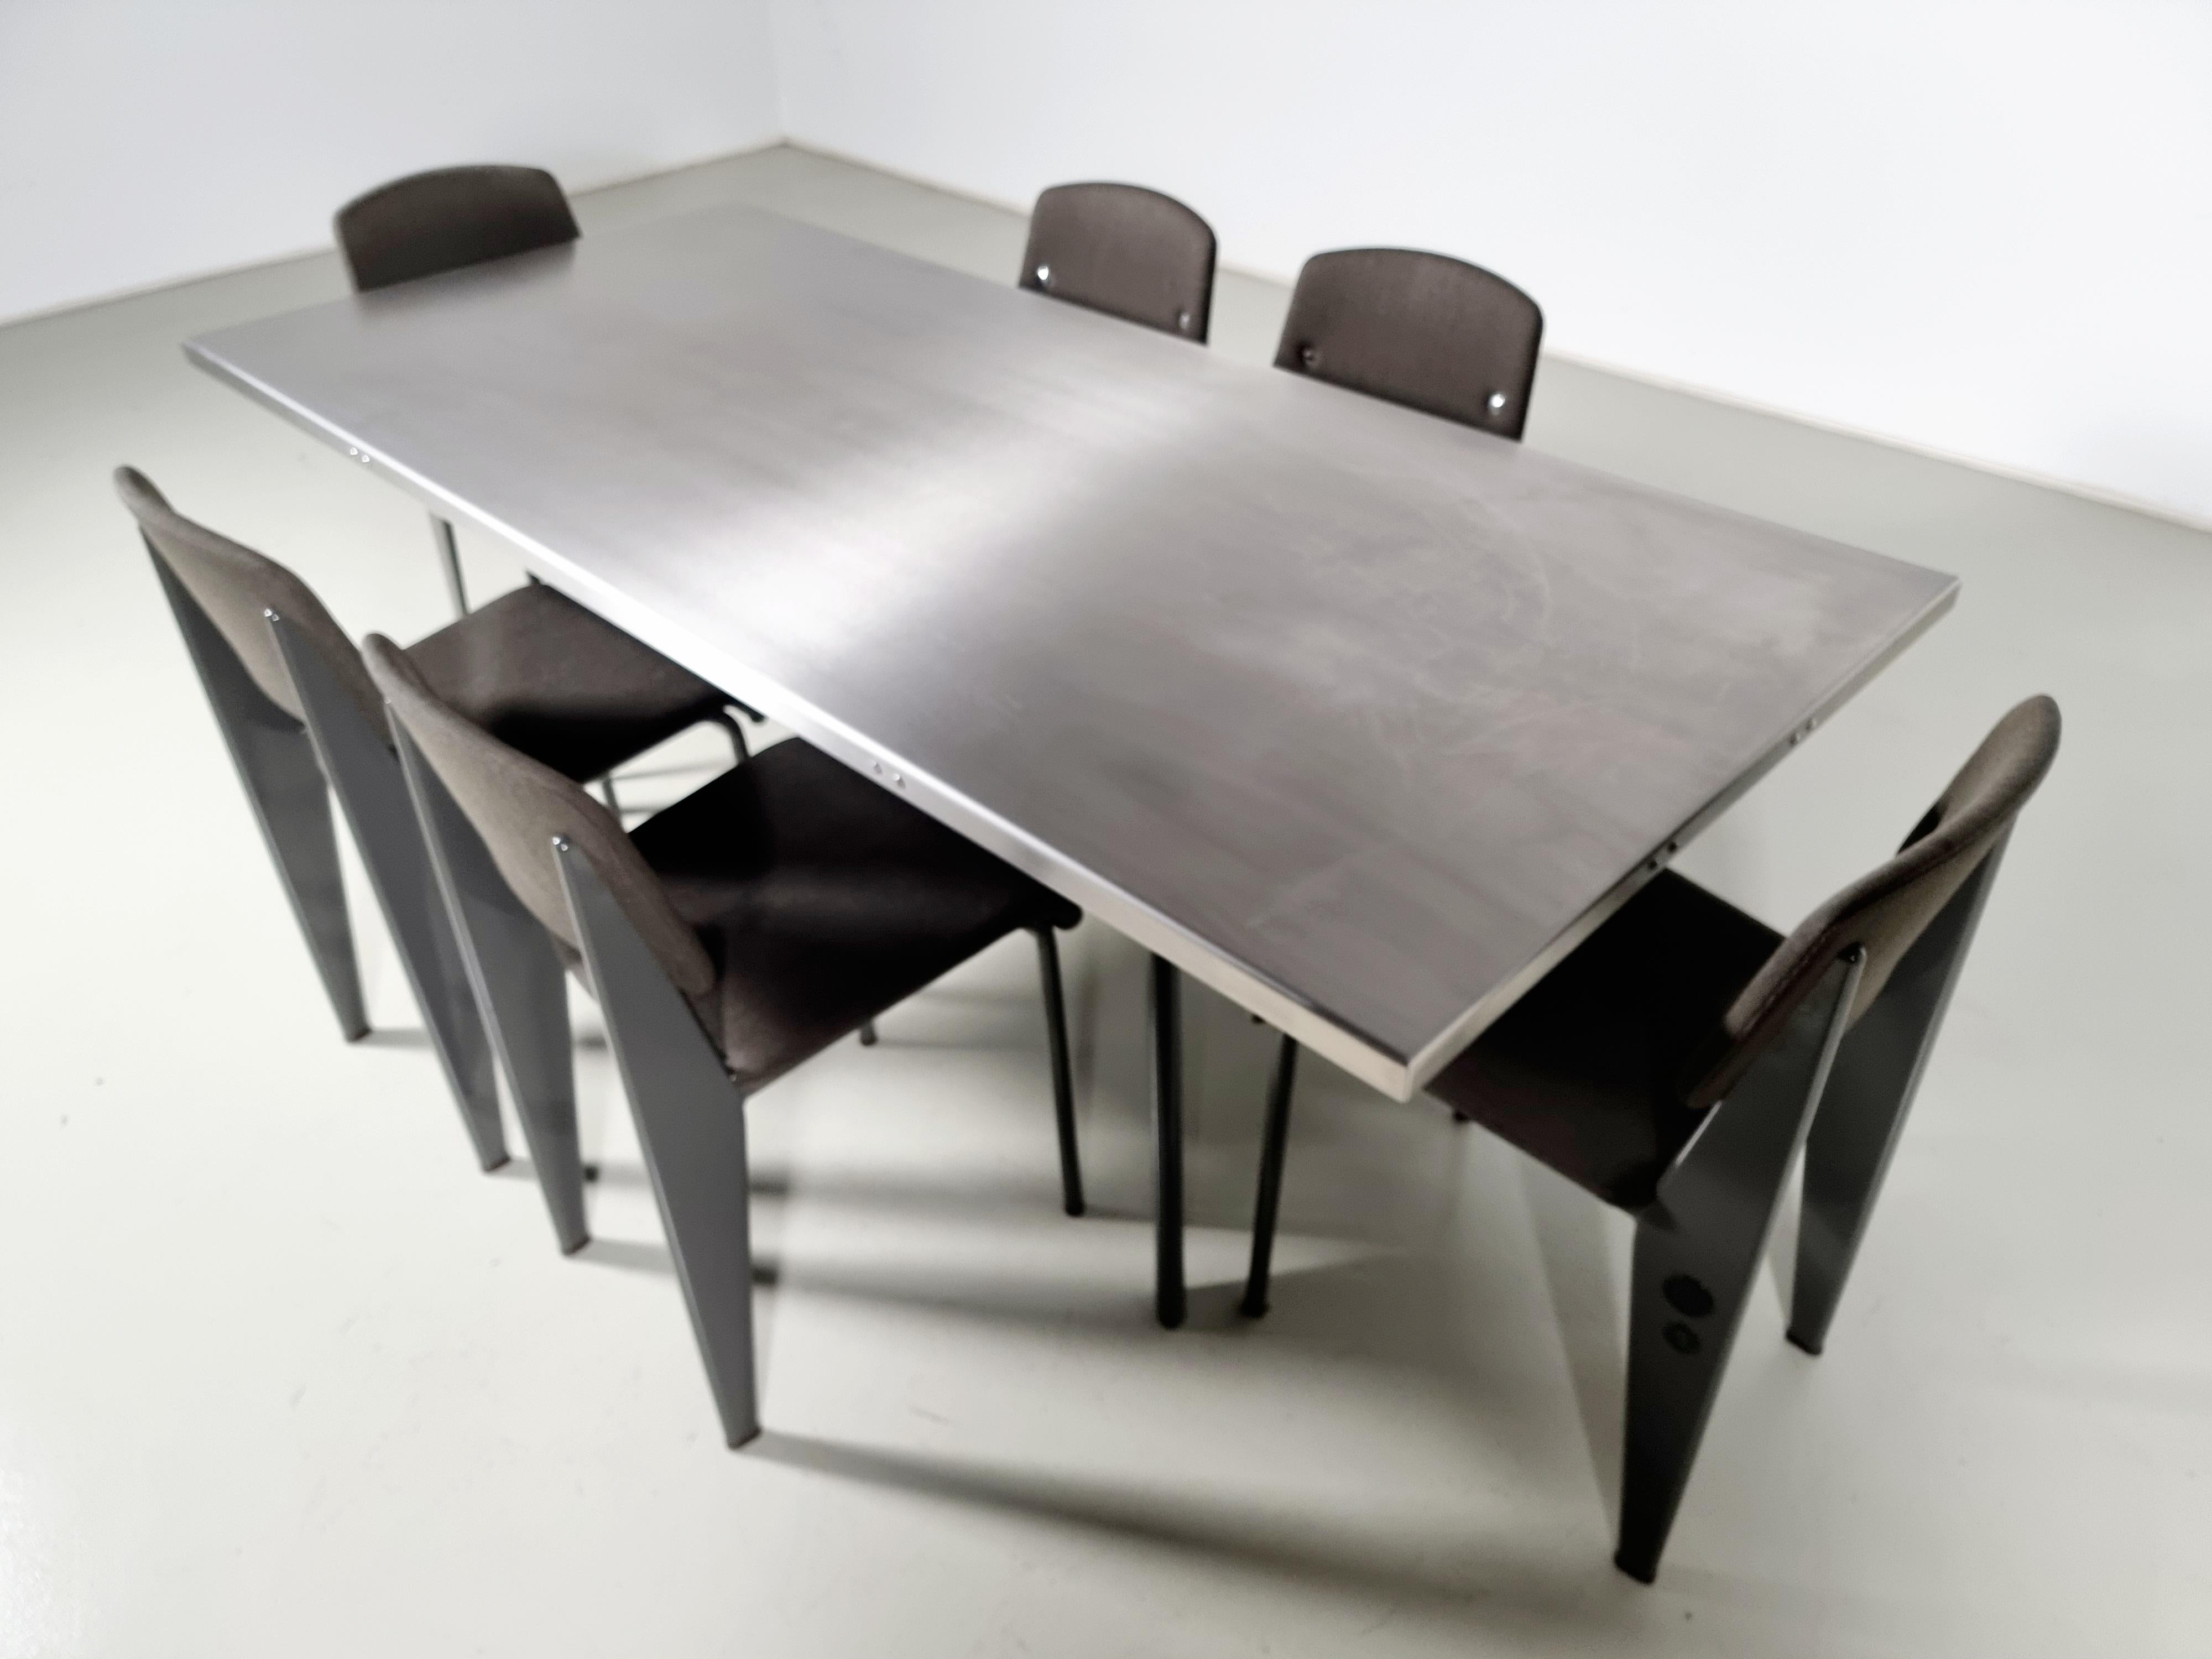 Contemporary Jean Prouve by G-Star Raw for Vitra S.A.M. Tropique Table with matching chairs For Sale